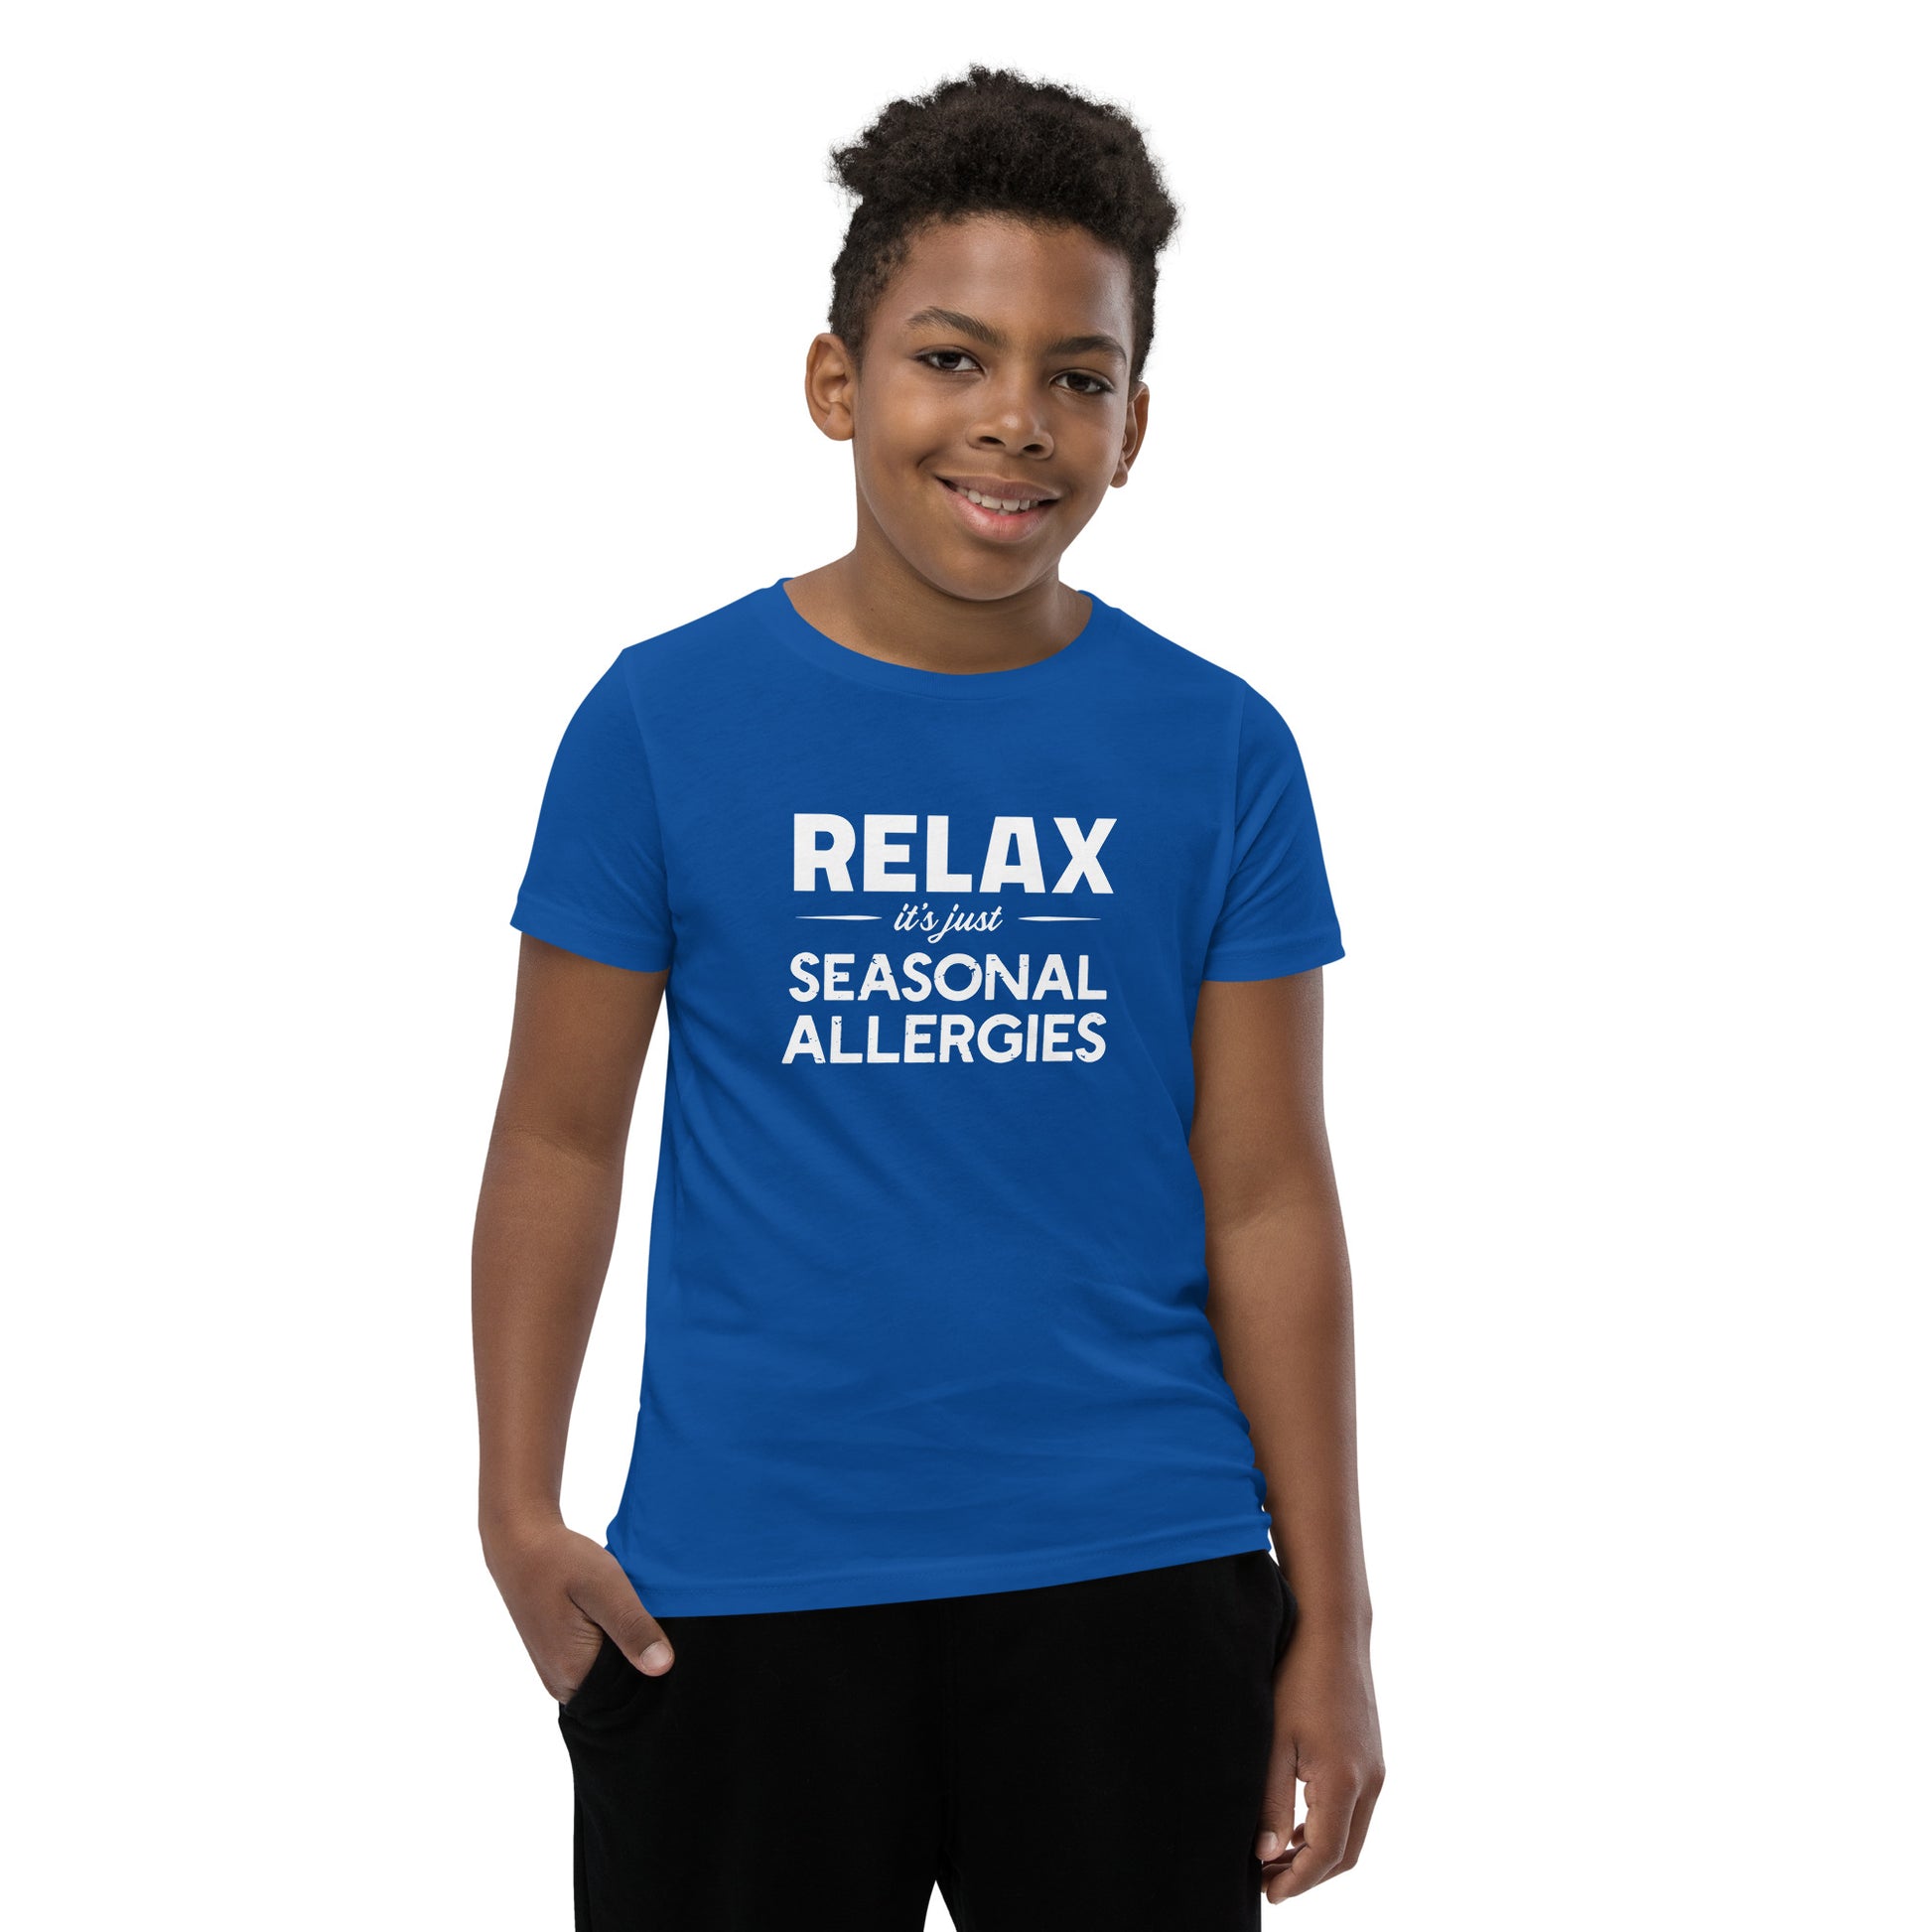 Model wearing True Royal blue youth t-shirt with white graphic: "RELAX it's just SEASONAL ALLERGIES"